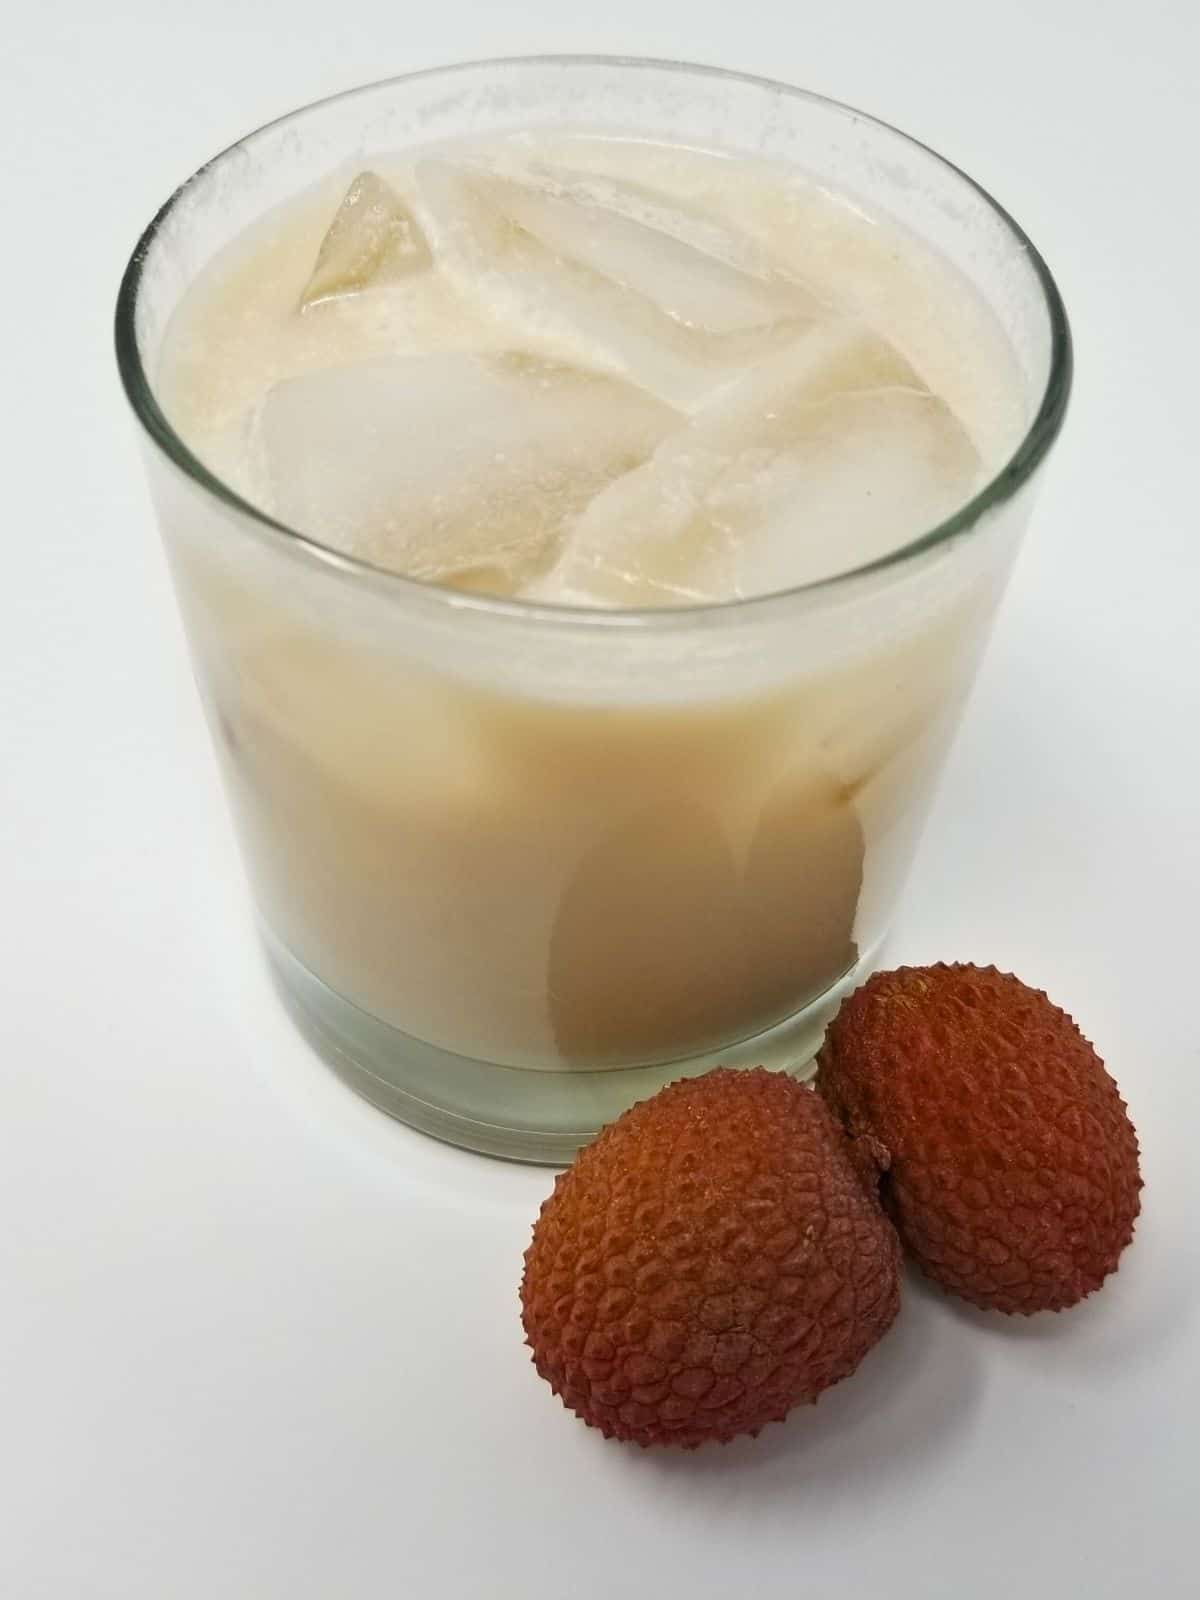 coconut lychee mocktail in a glass served with ice.